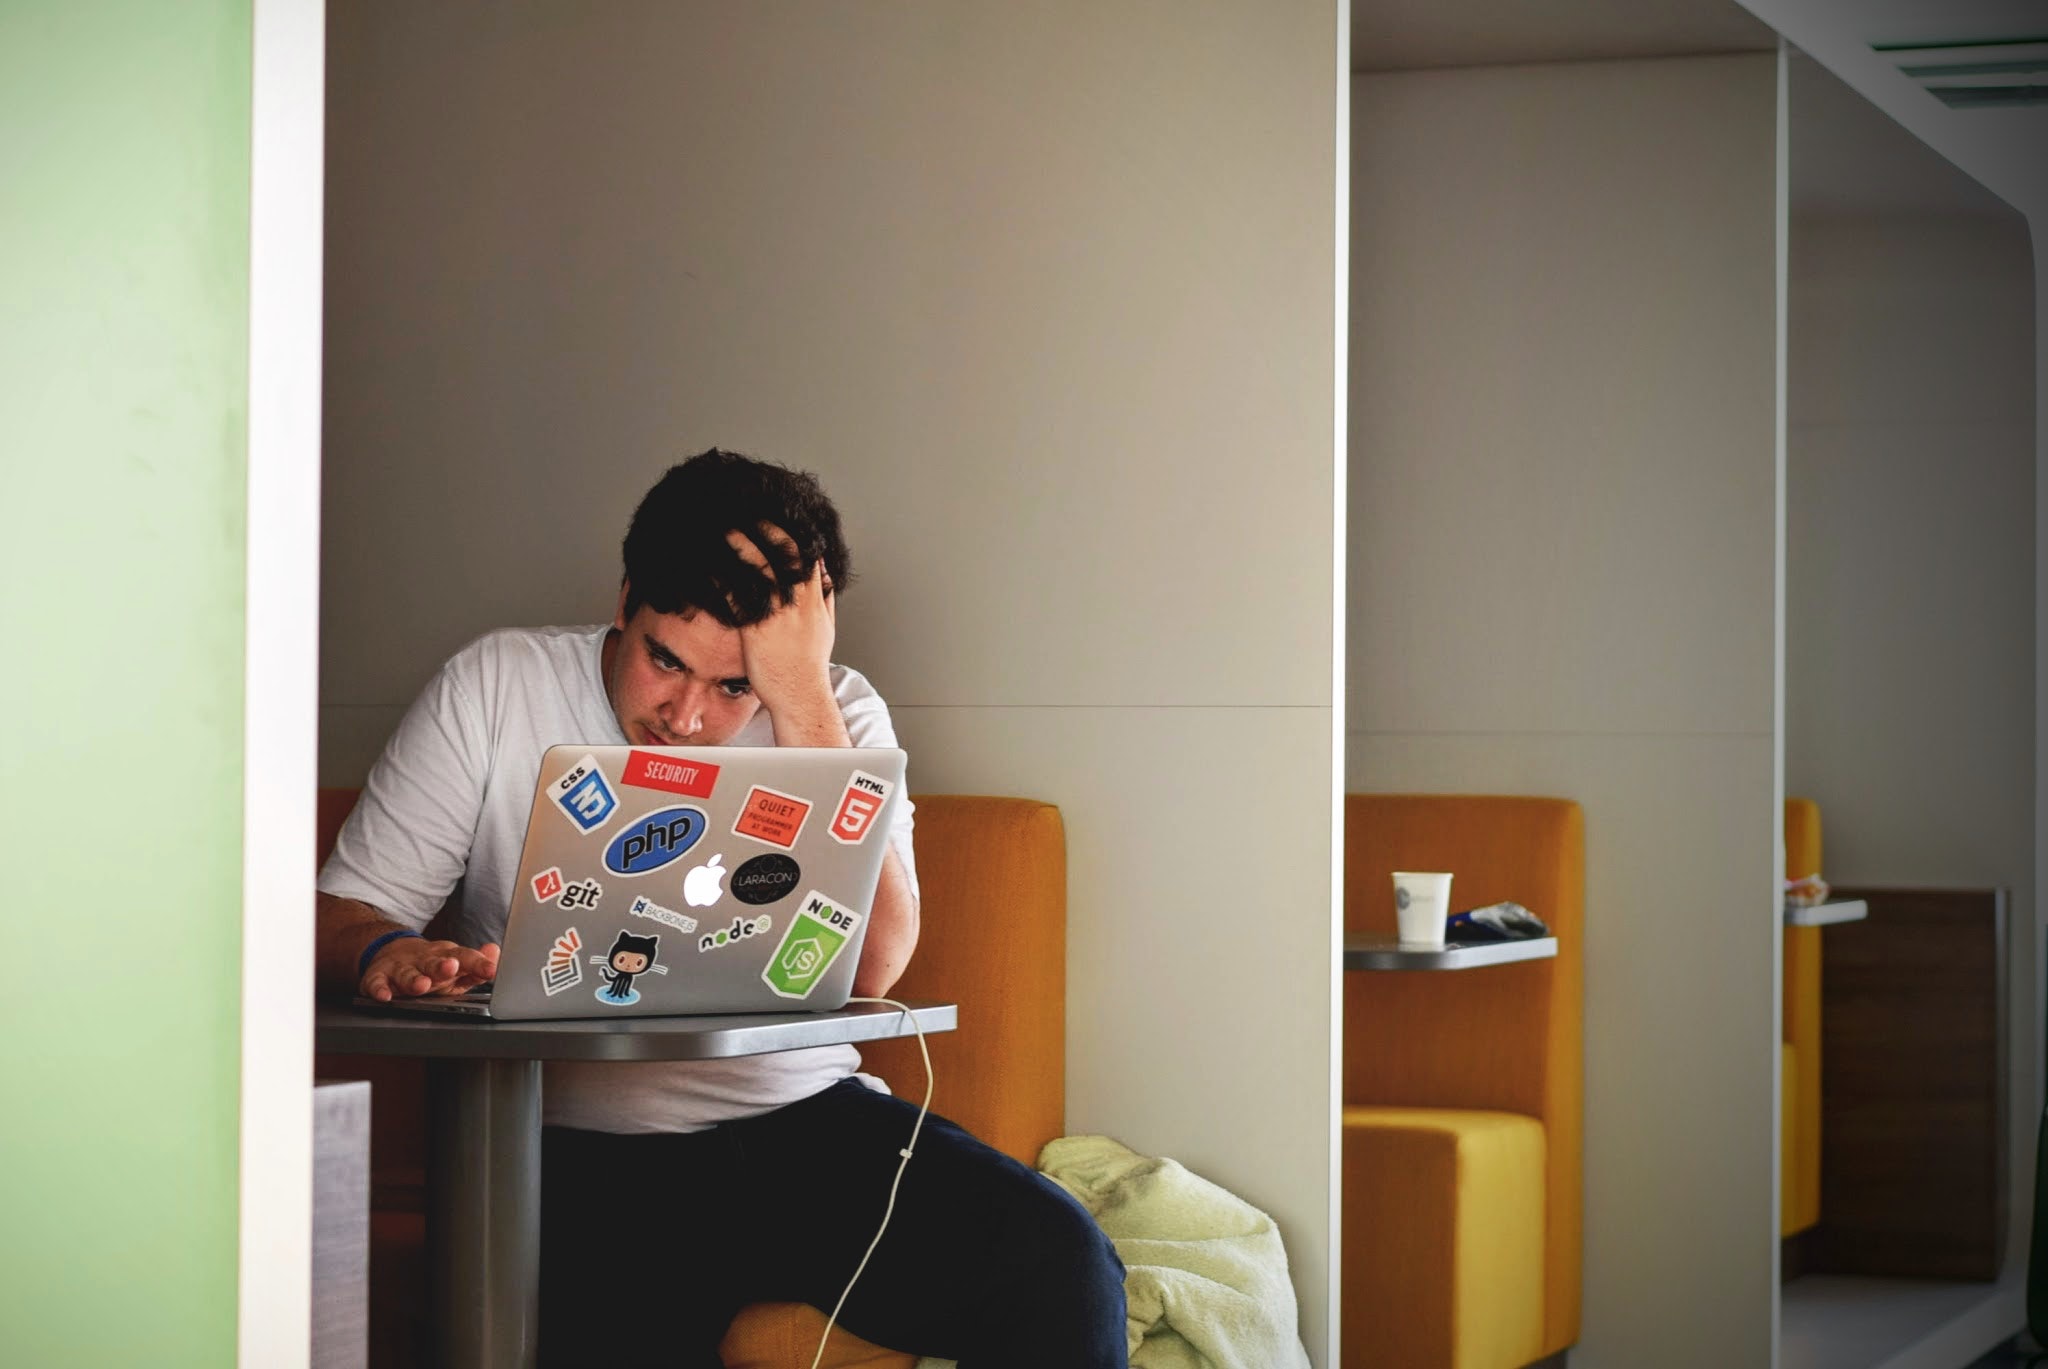 Man working on his laptop looking stressed